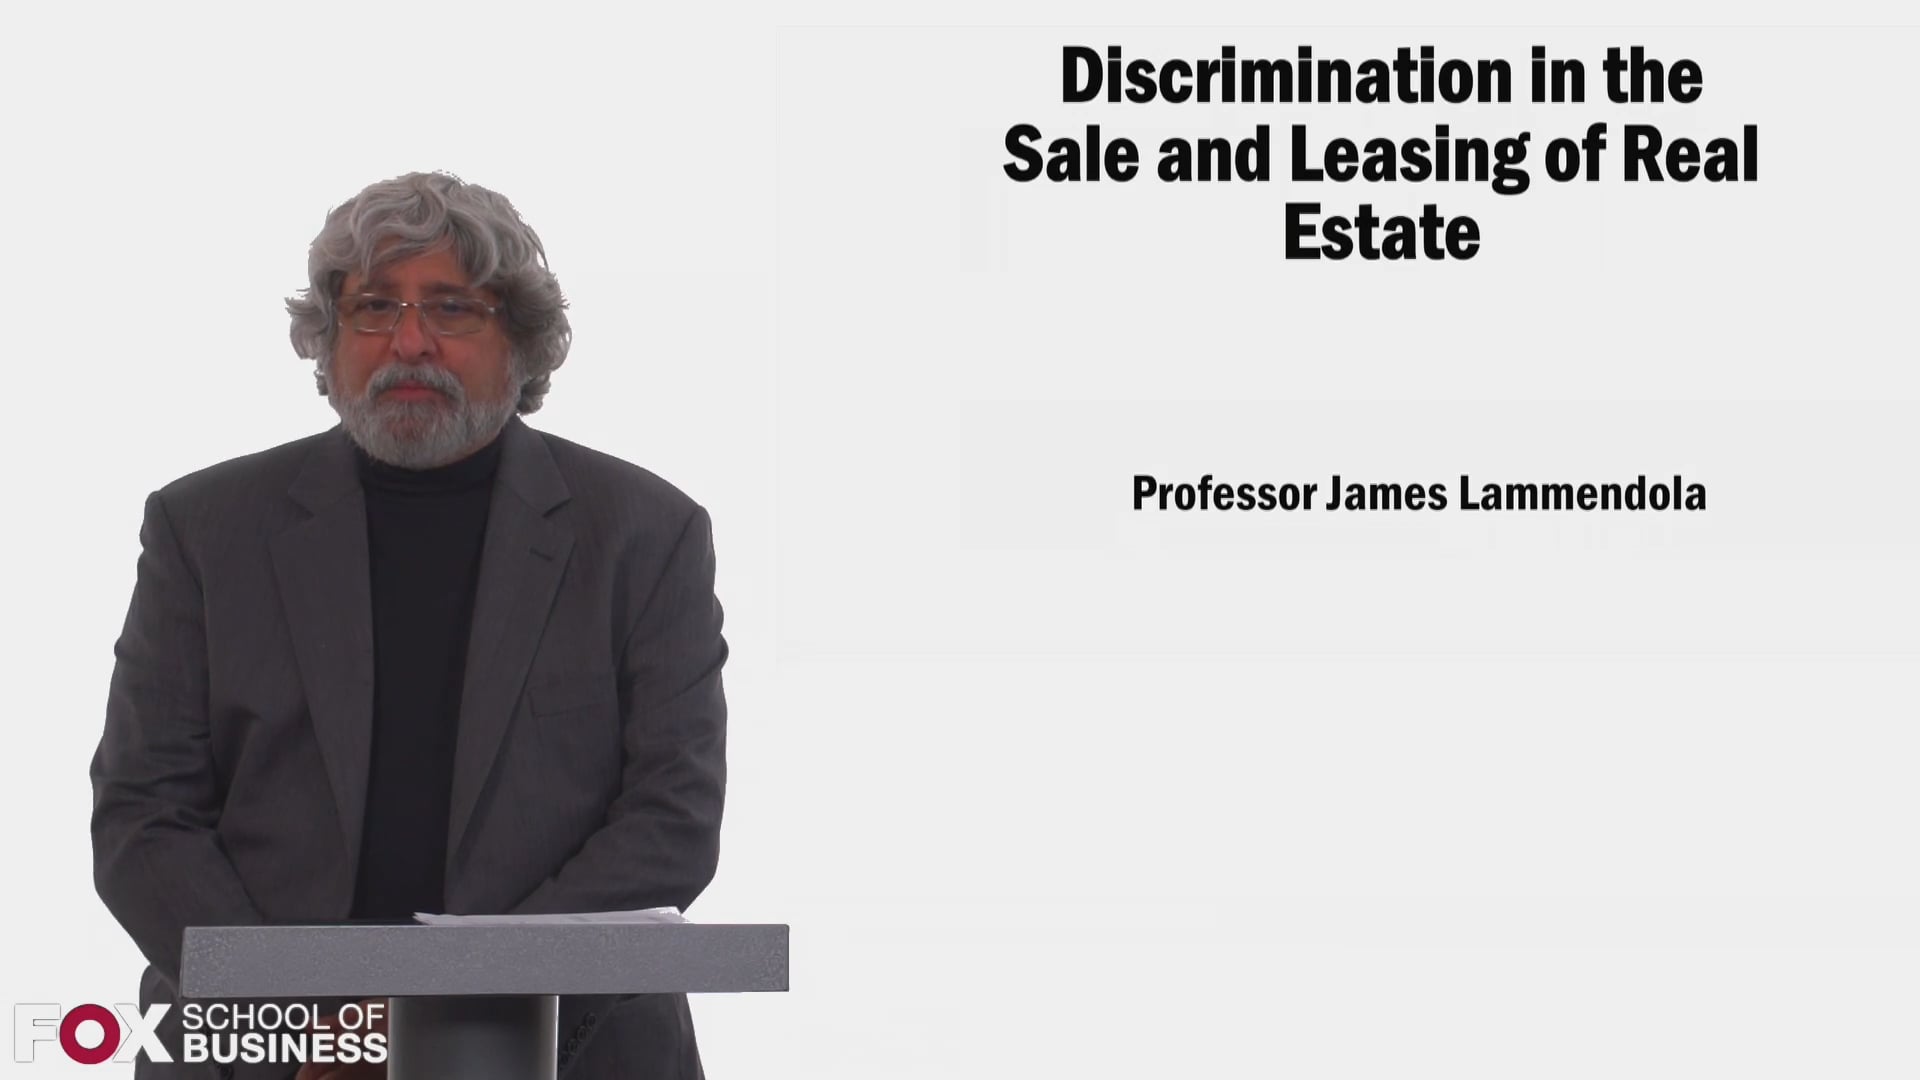 Discrimination in the Sale and Leasing of Real Estate